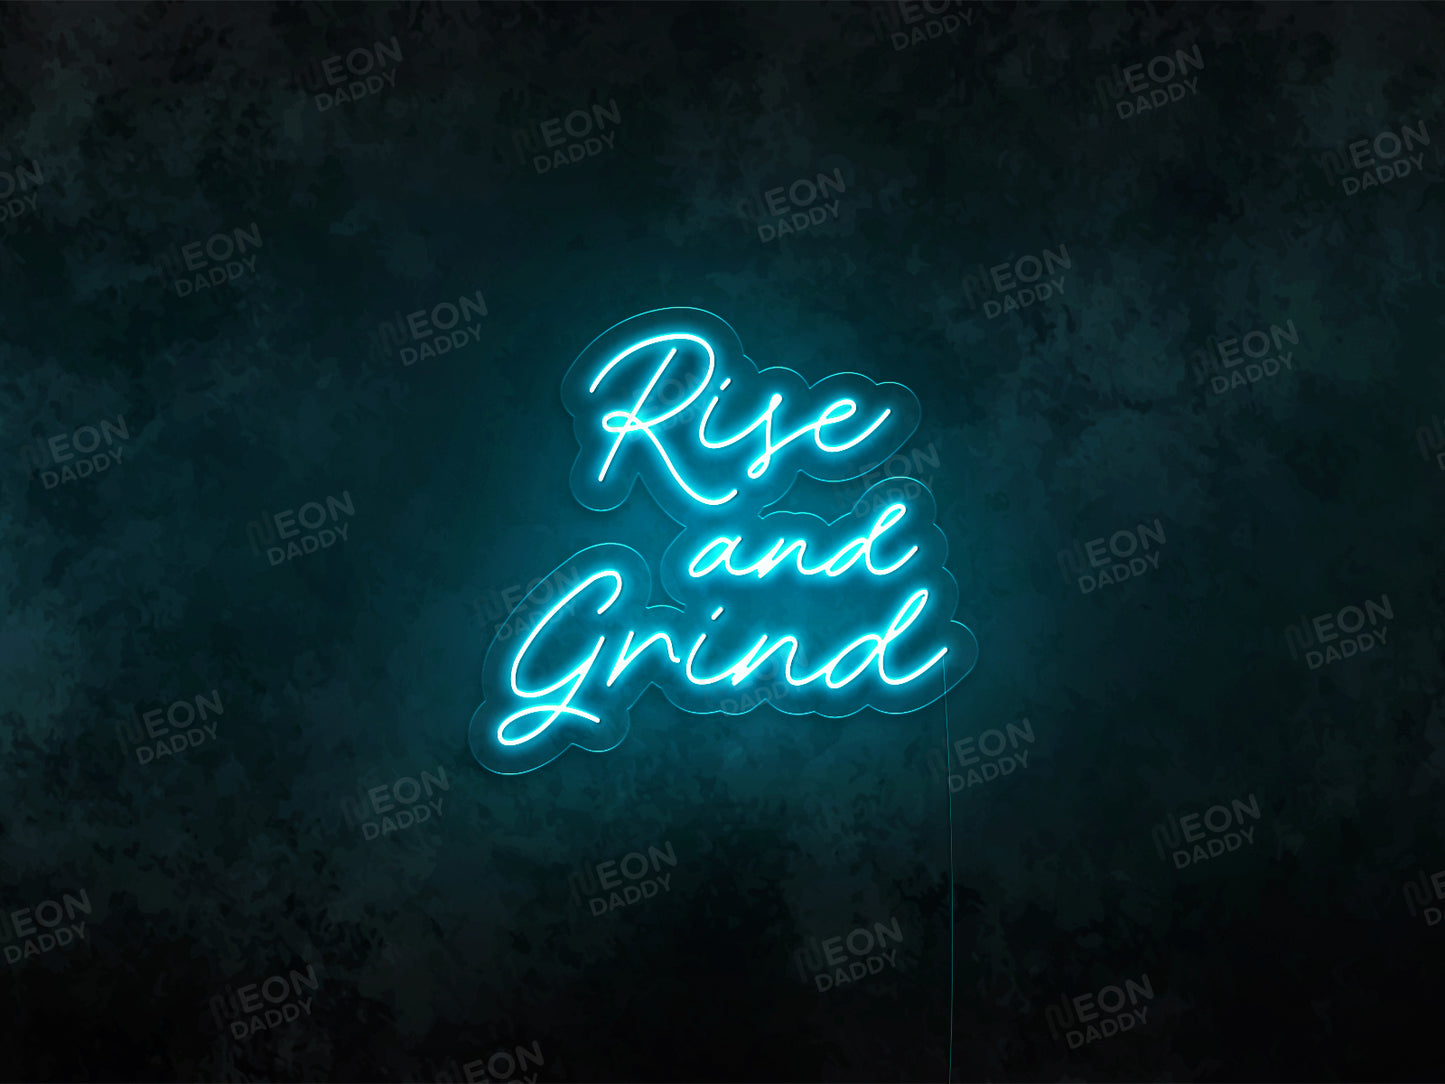 Rise and Grind LED Neon Sign